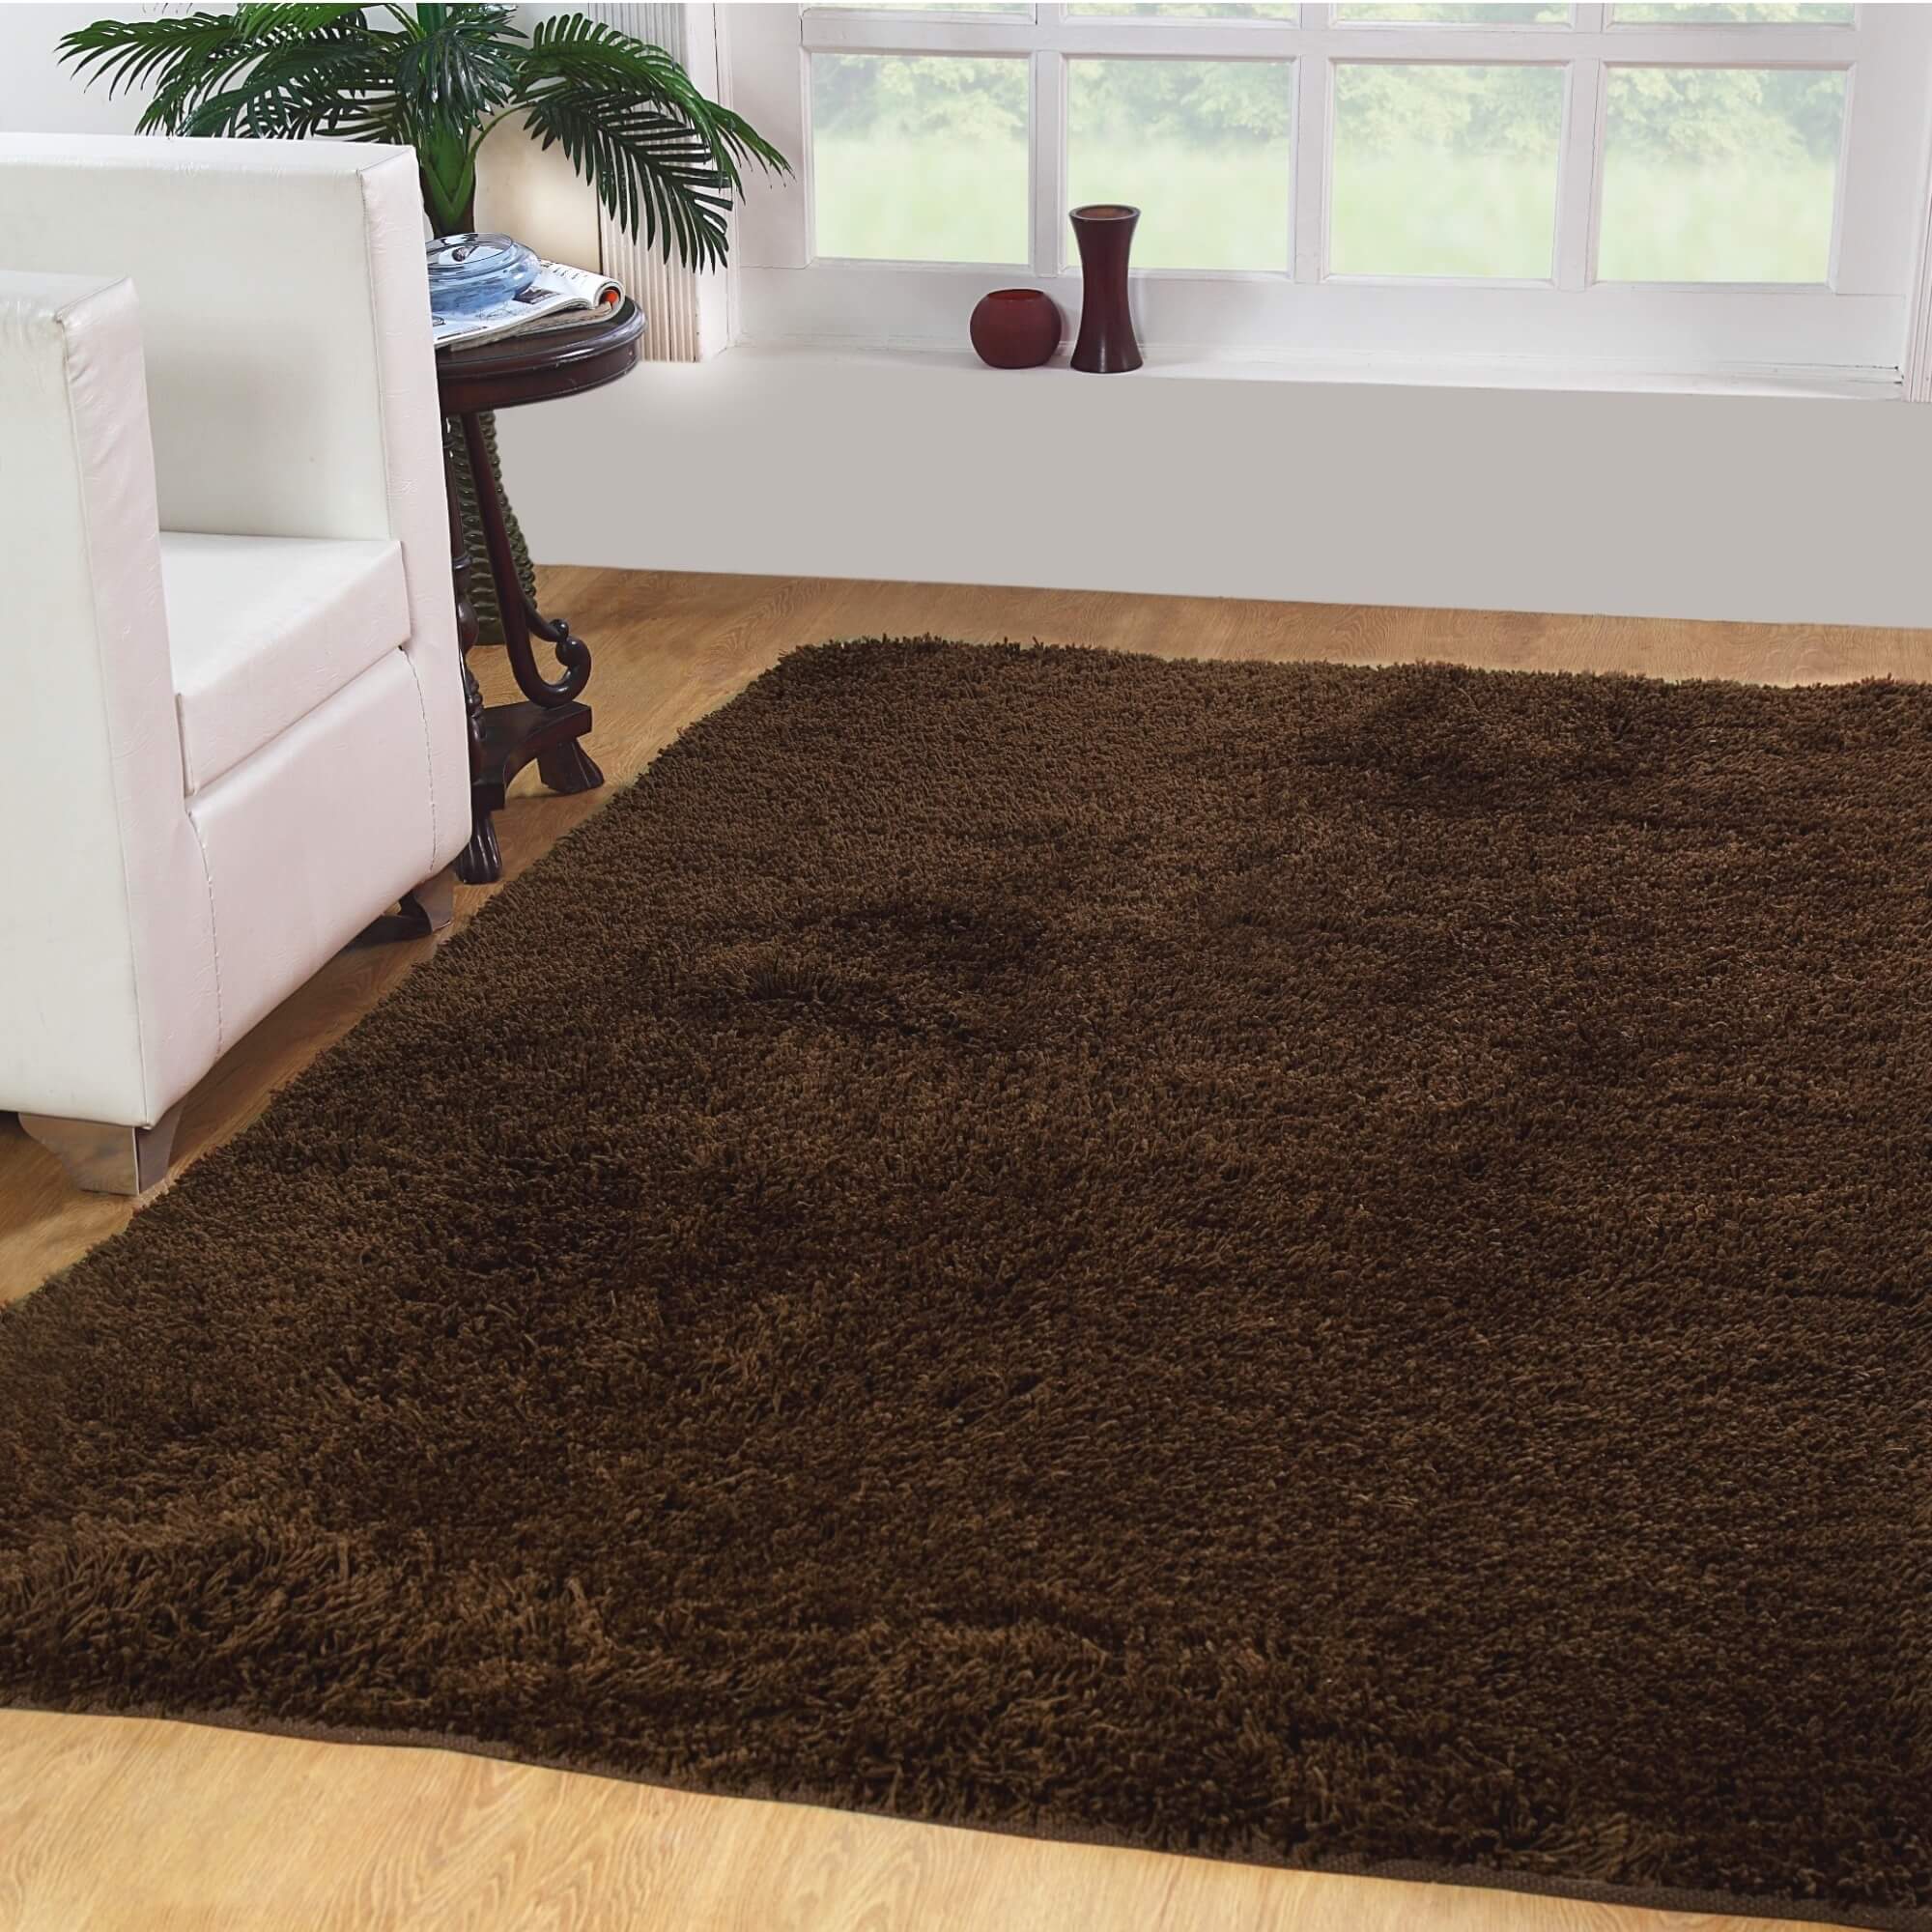 How To Enjoy The Benefits Of A Wool Carpet